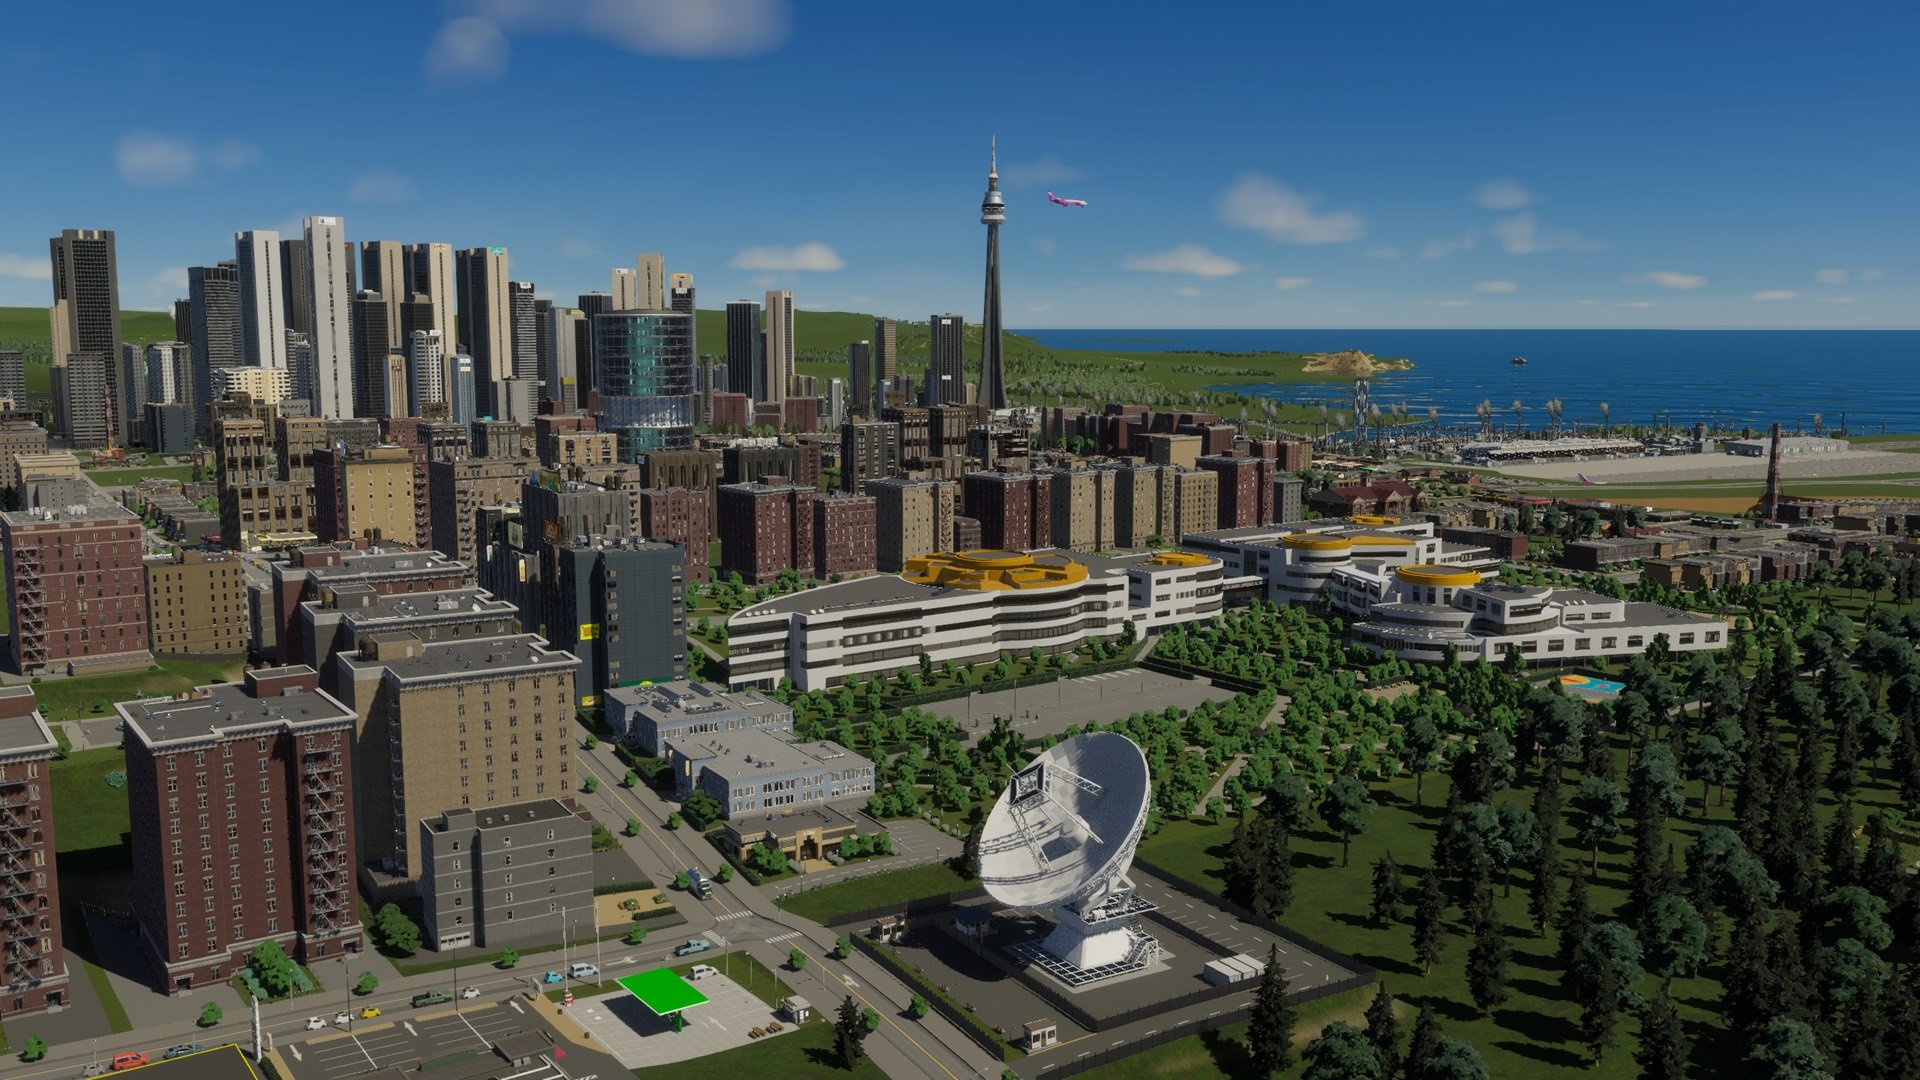 Cities Skylines 2 system requirements, Minimum and recommended PC specs